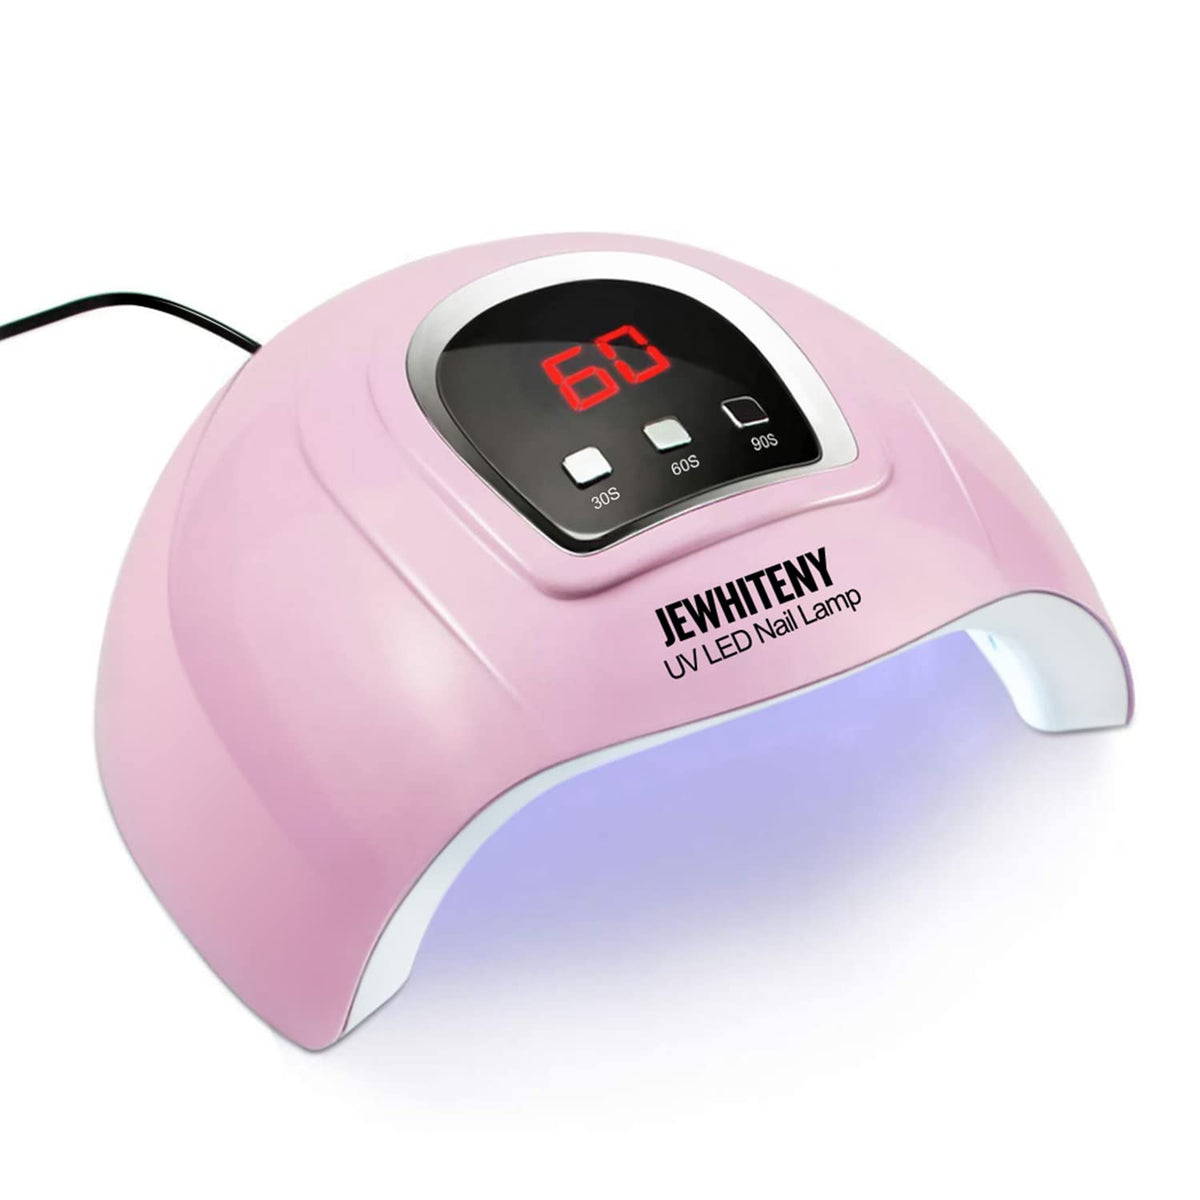 54W Professional Nail Dryer Gel Polish Light, UV Light with 3 Timer Setting, Curing Gel LED Dryer, Art Tools with Automatic Sensor, LCD Display